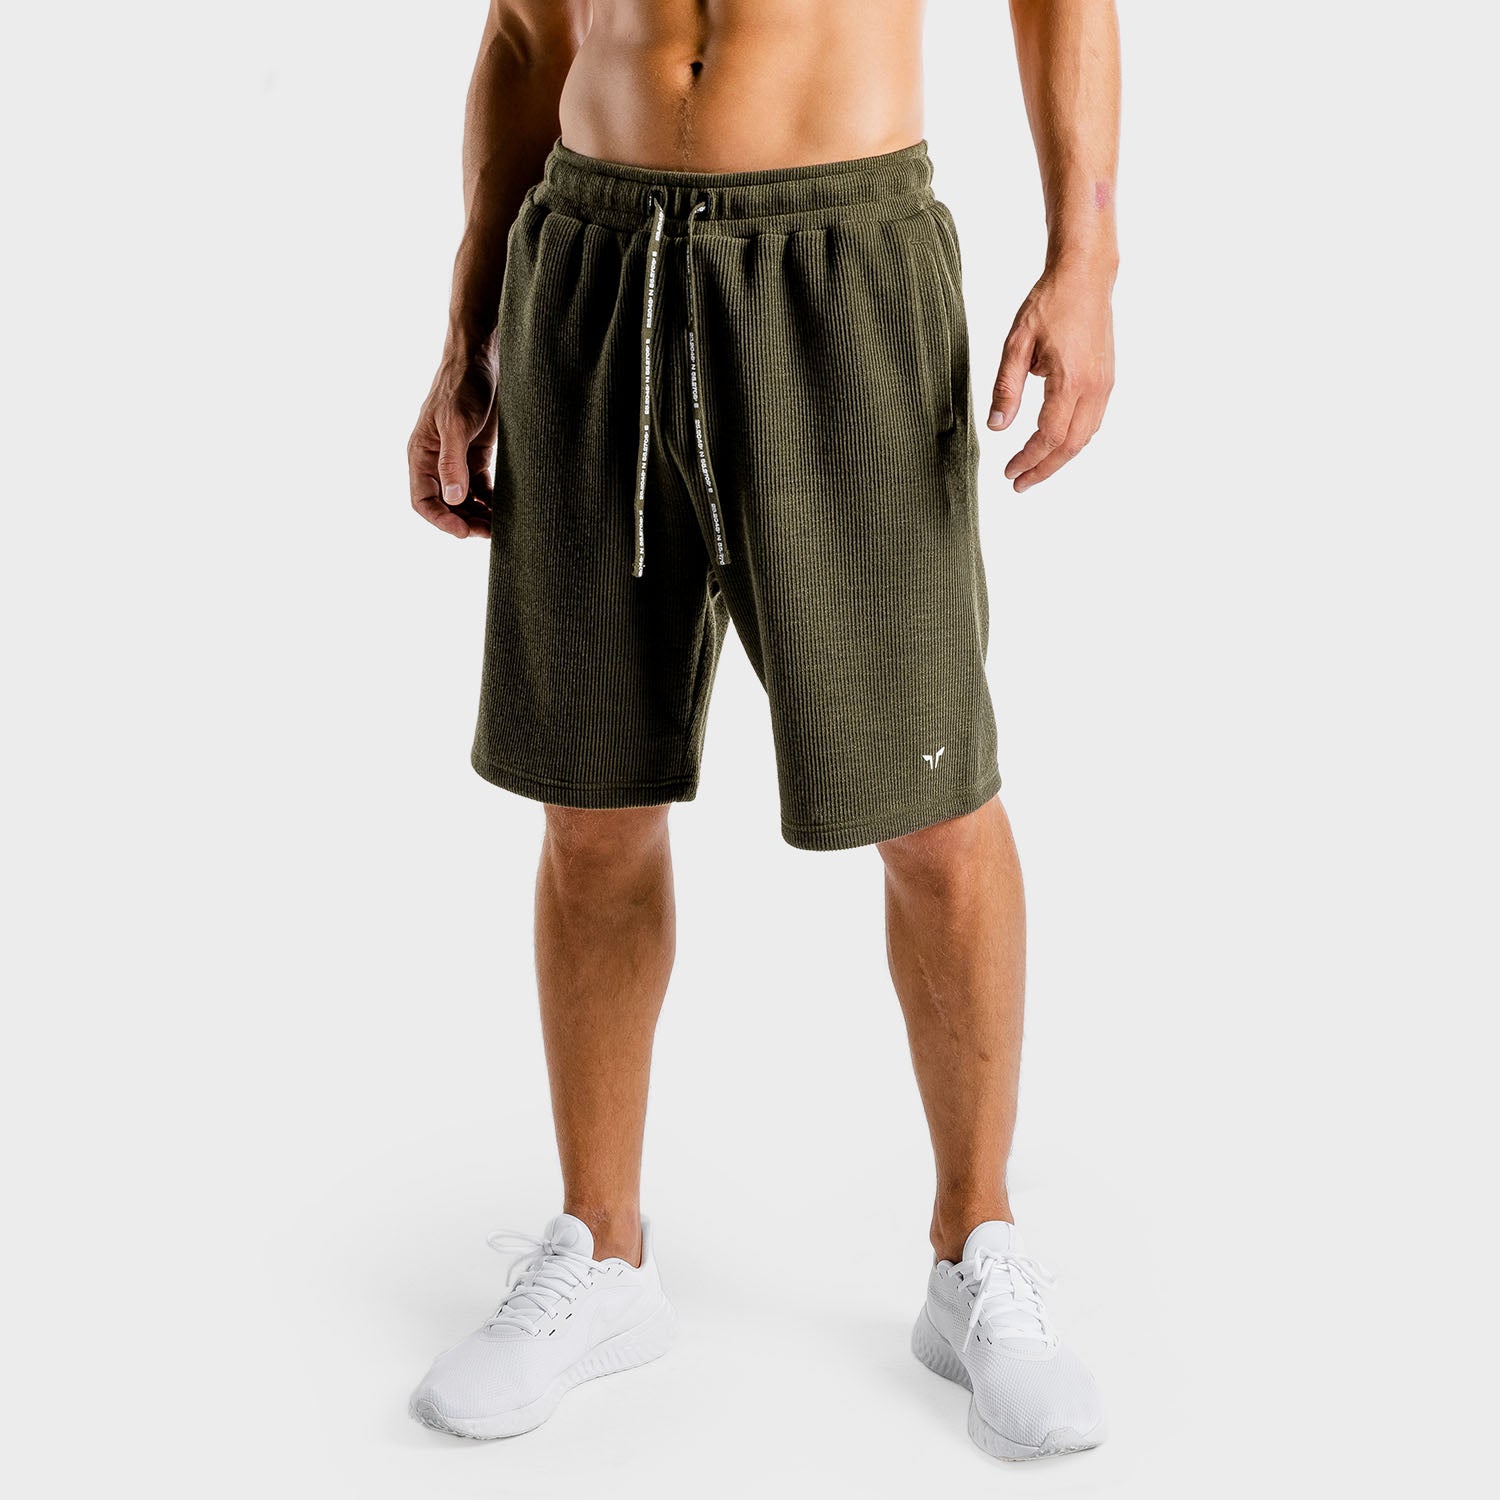 squatwolf-gym-wear-luxe-shorts-green-workout-shorts-for-men